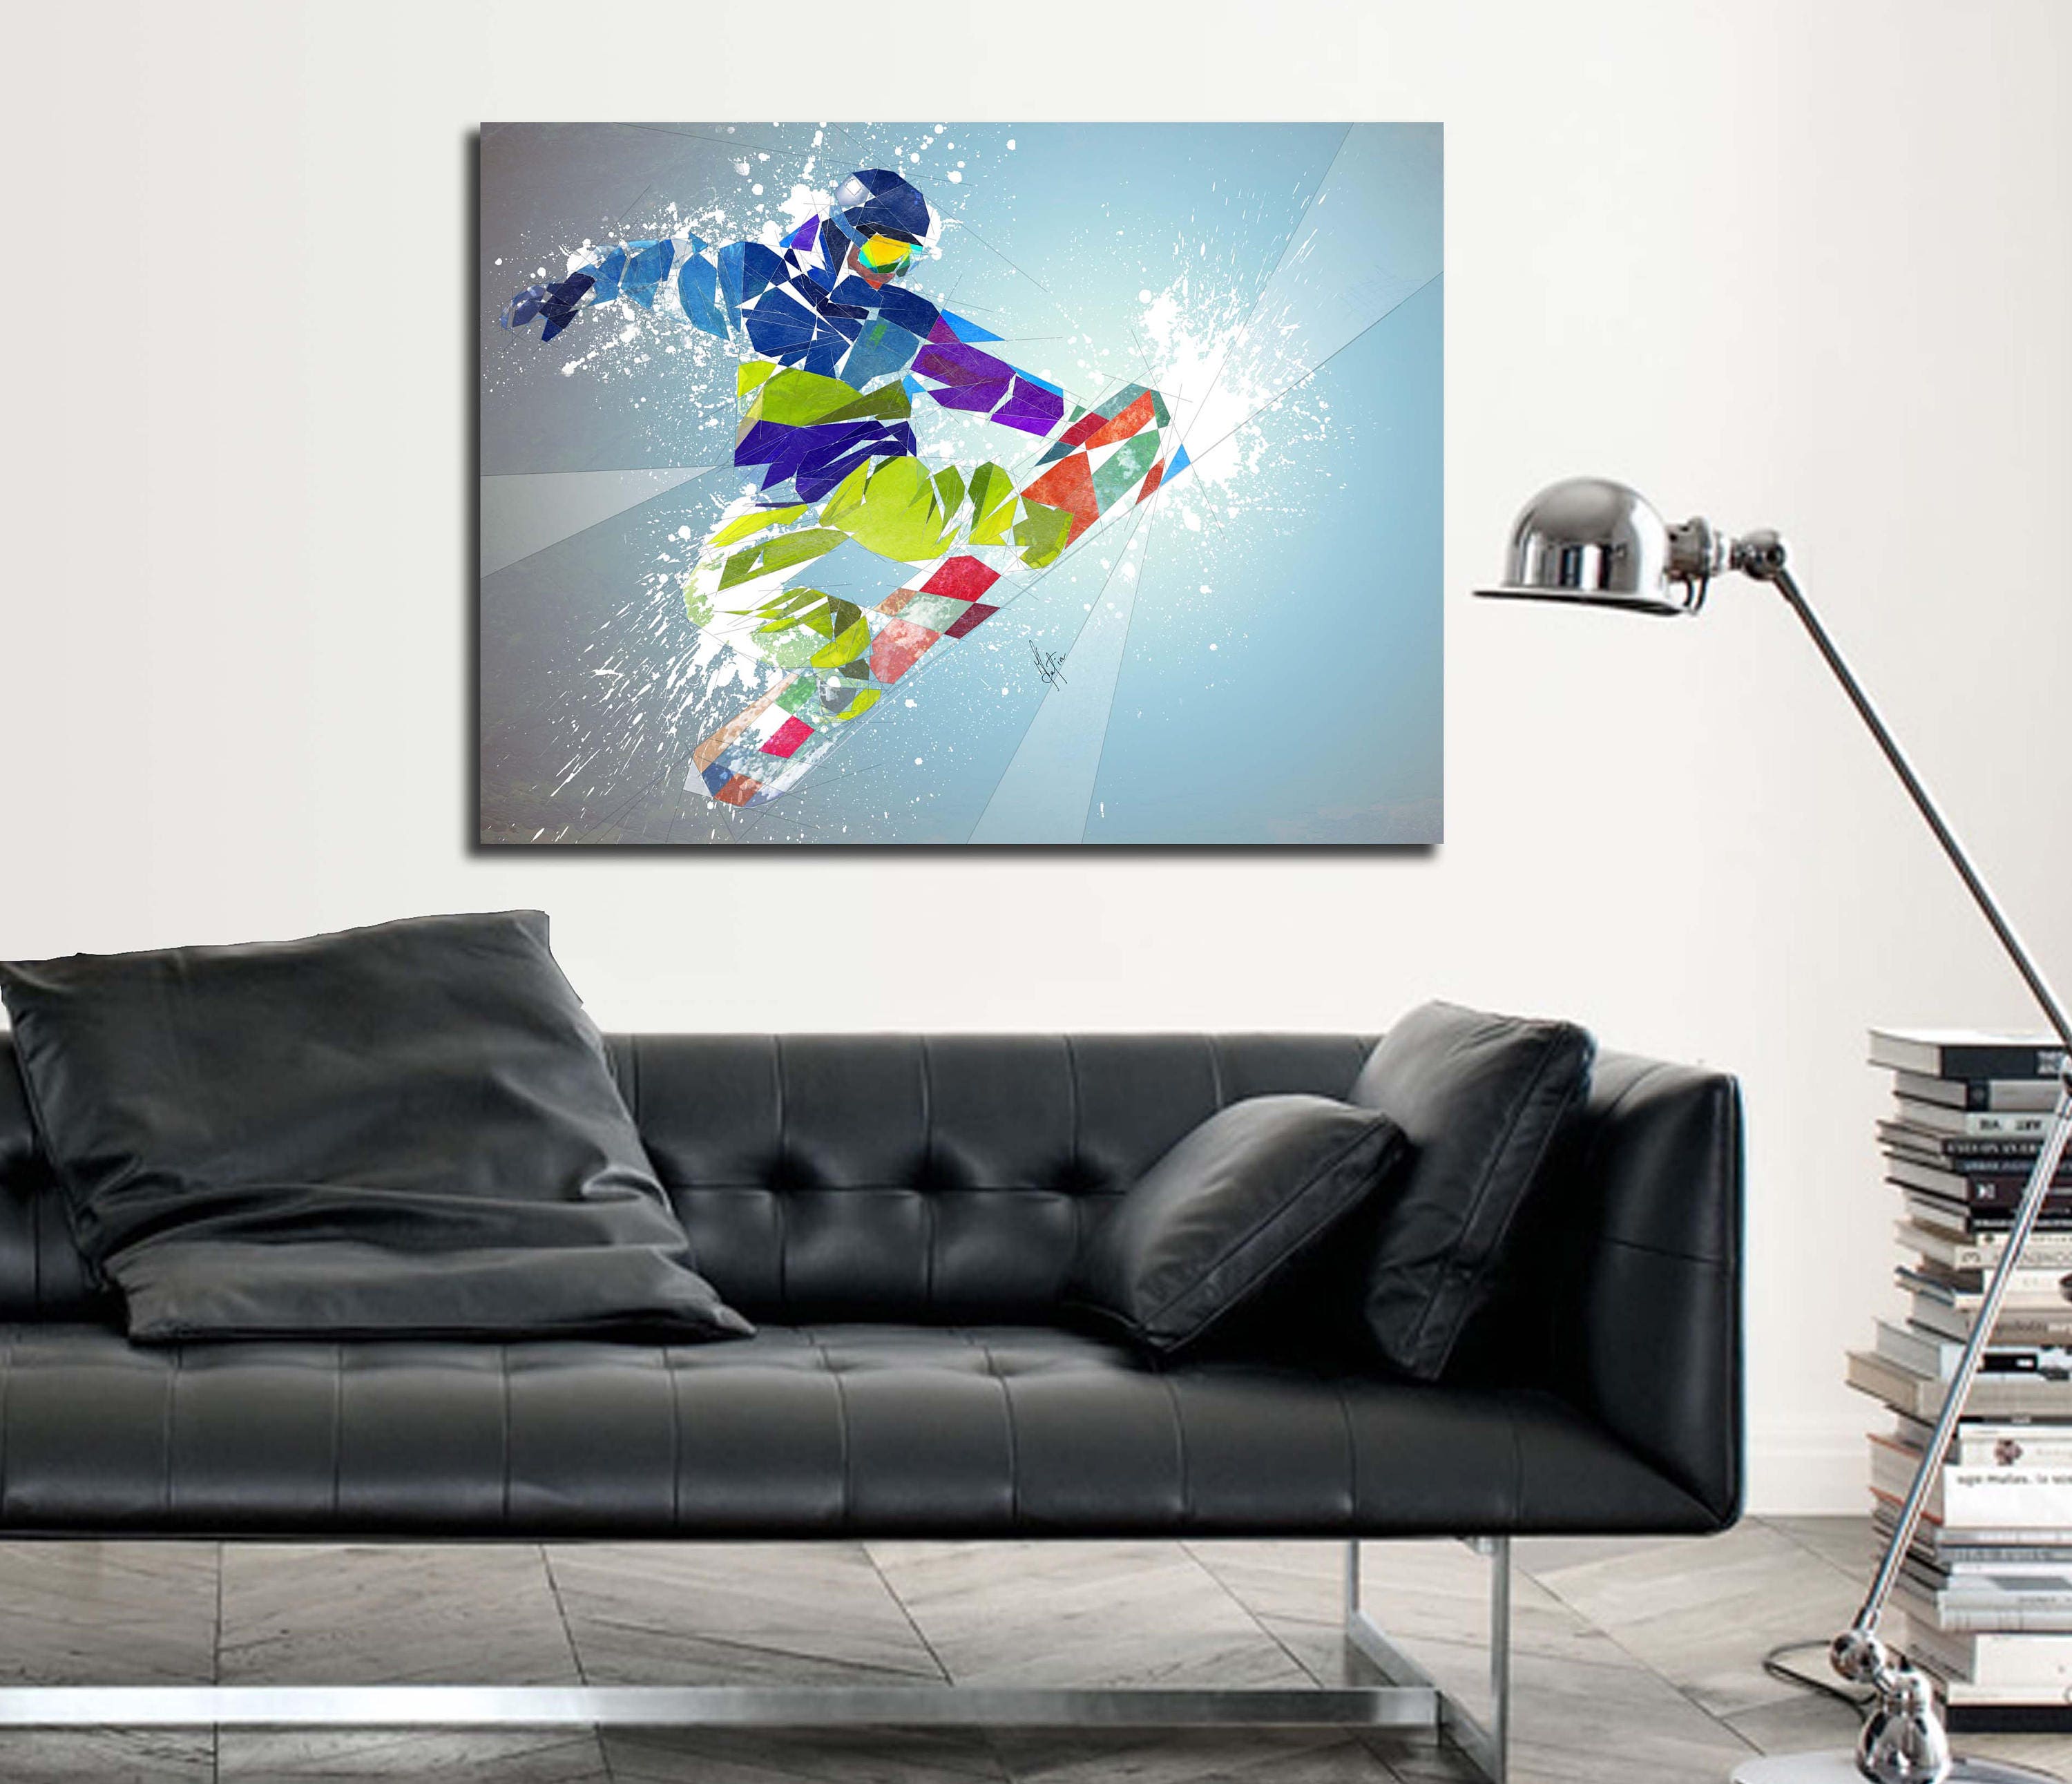 ABSTRACT CANVAS ALL ART